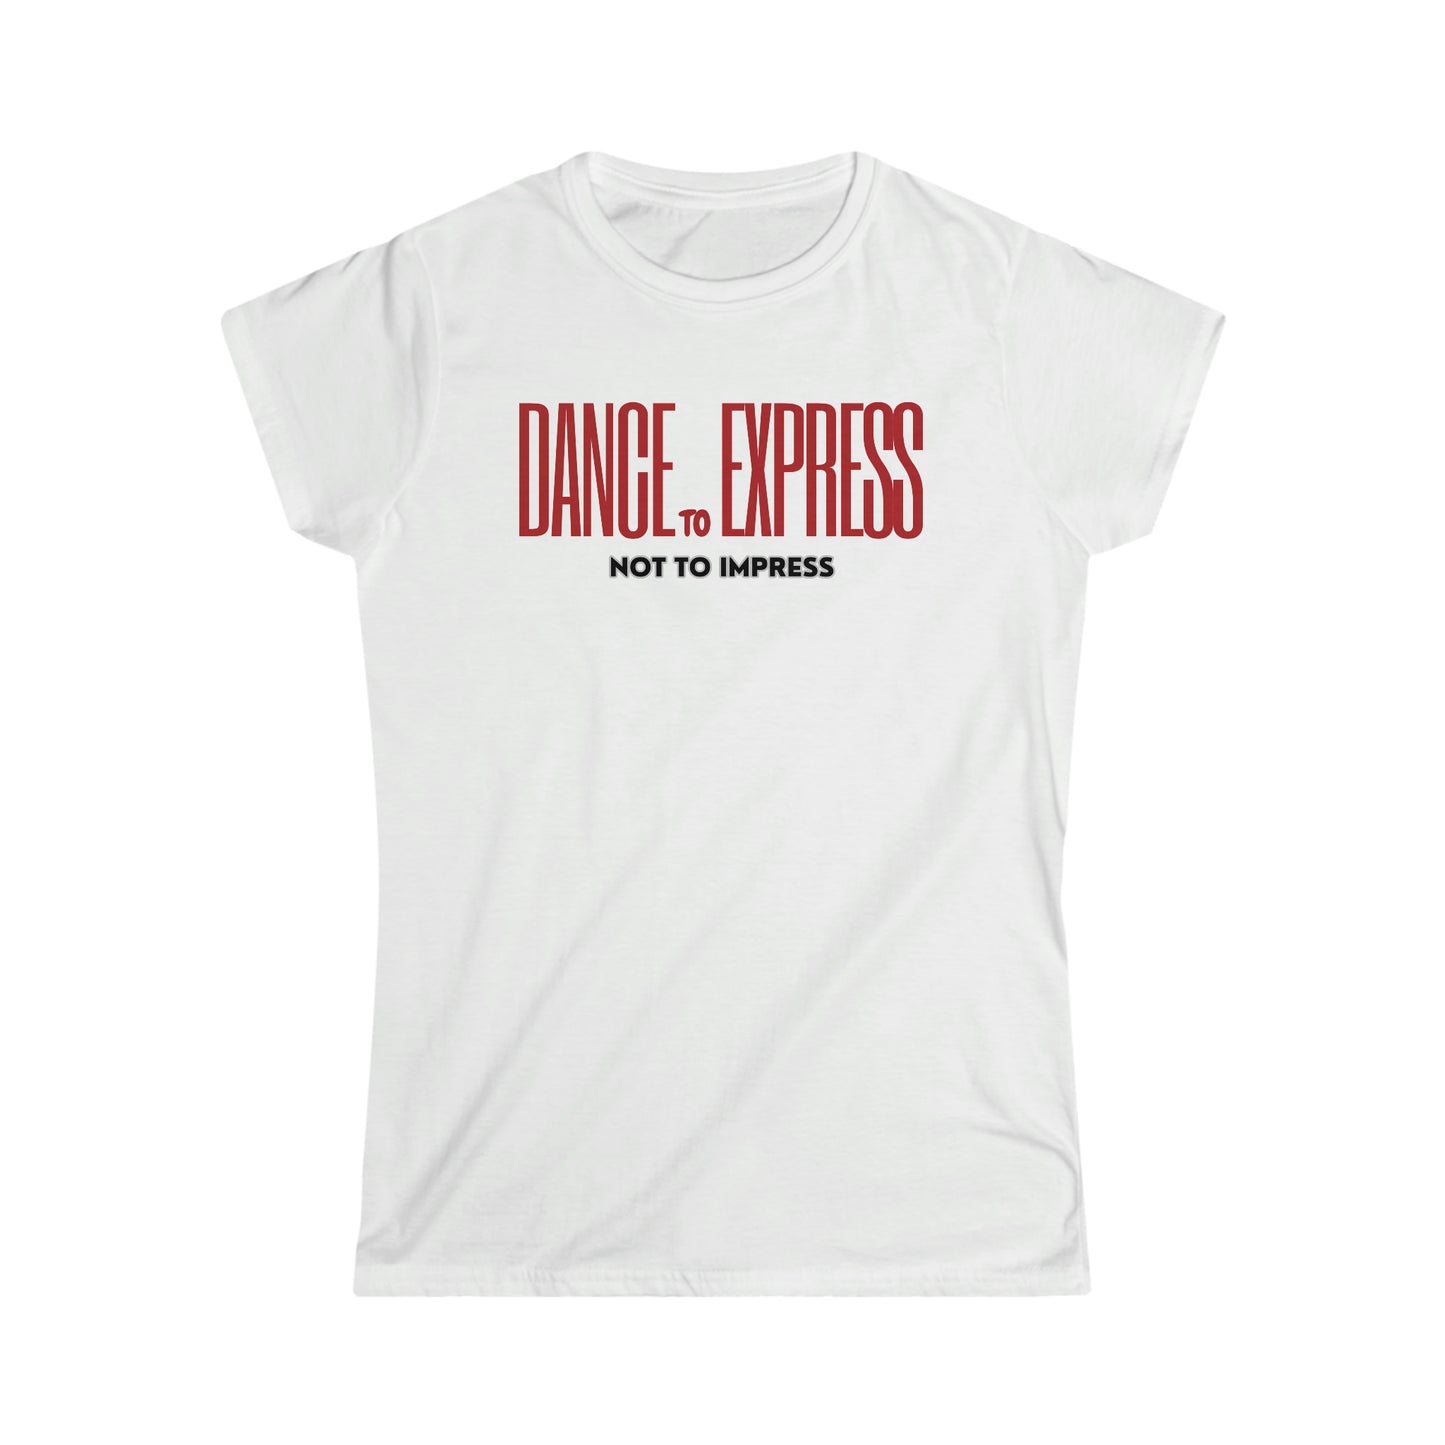 A dance tshirt with the text "Dance to express not to impress"